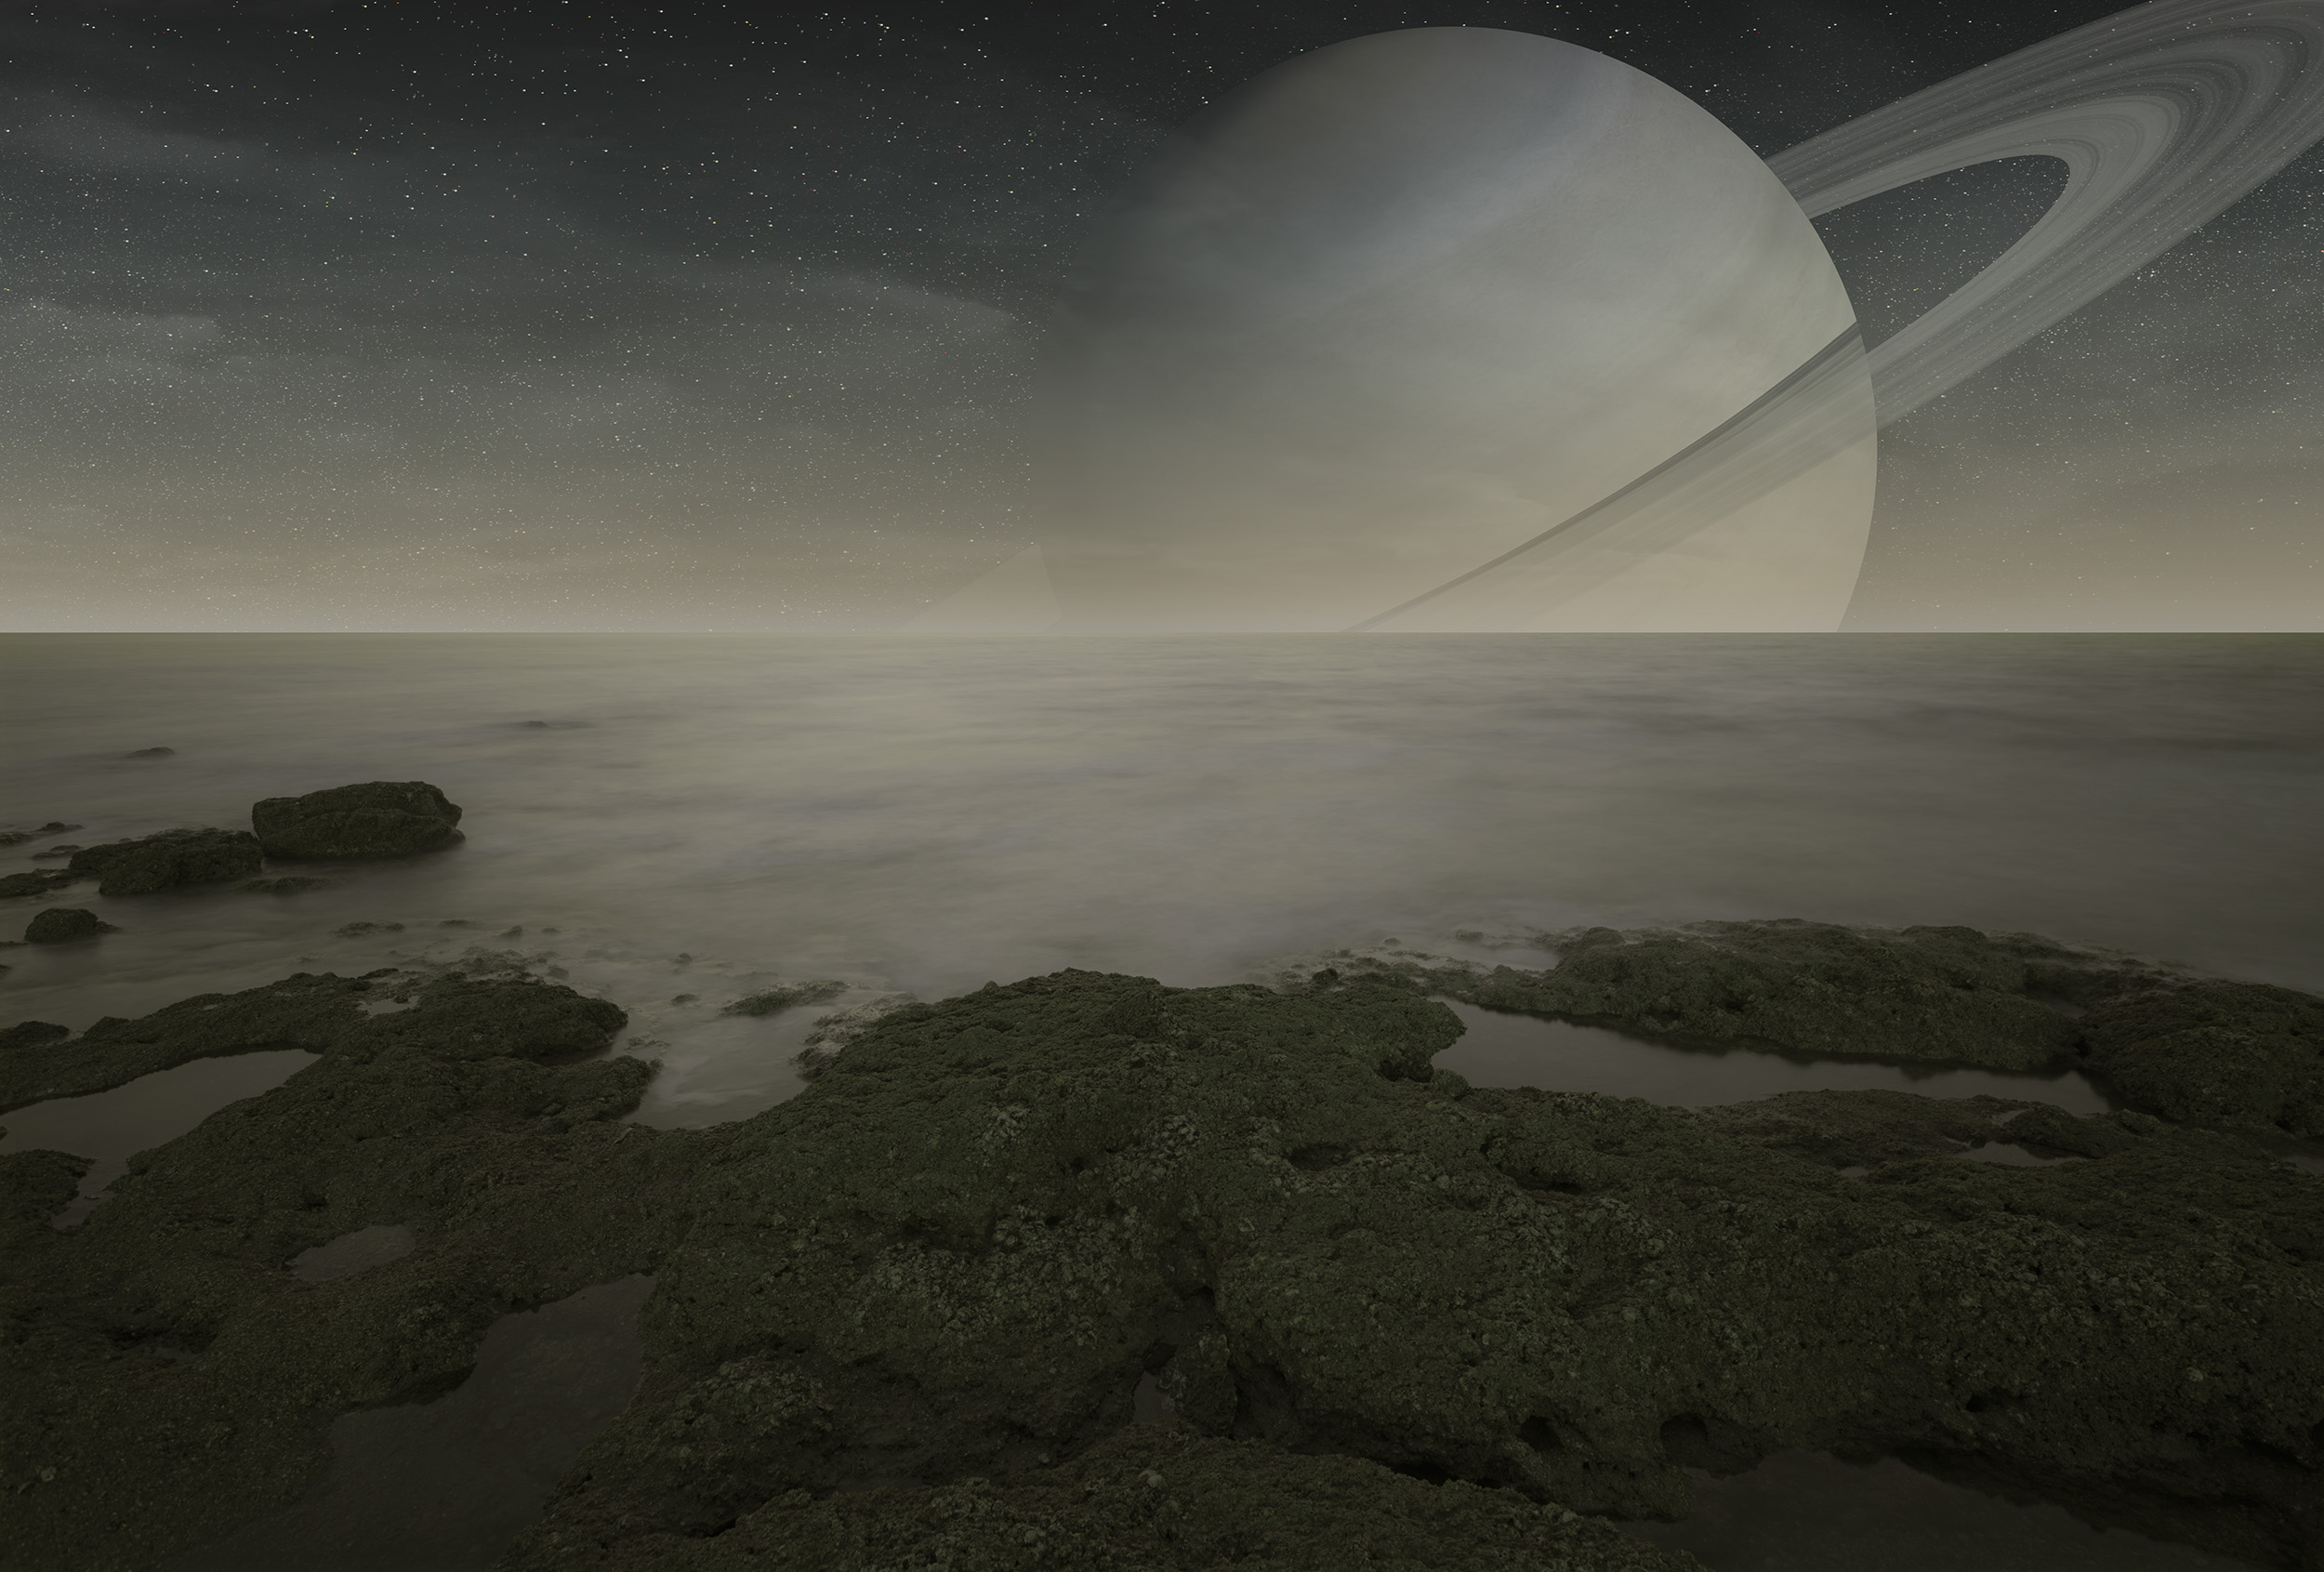 An artist's rendering of the surface of Titan, a moon of Saturn. Courtesy: iPhoto Stock, manjik.